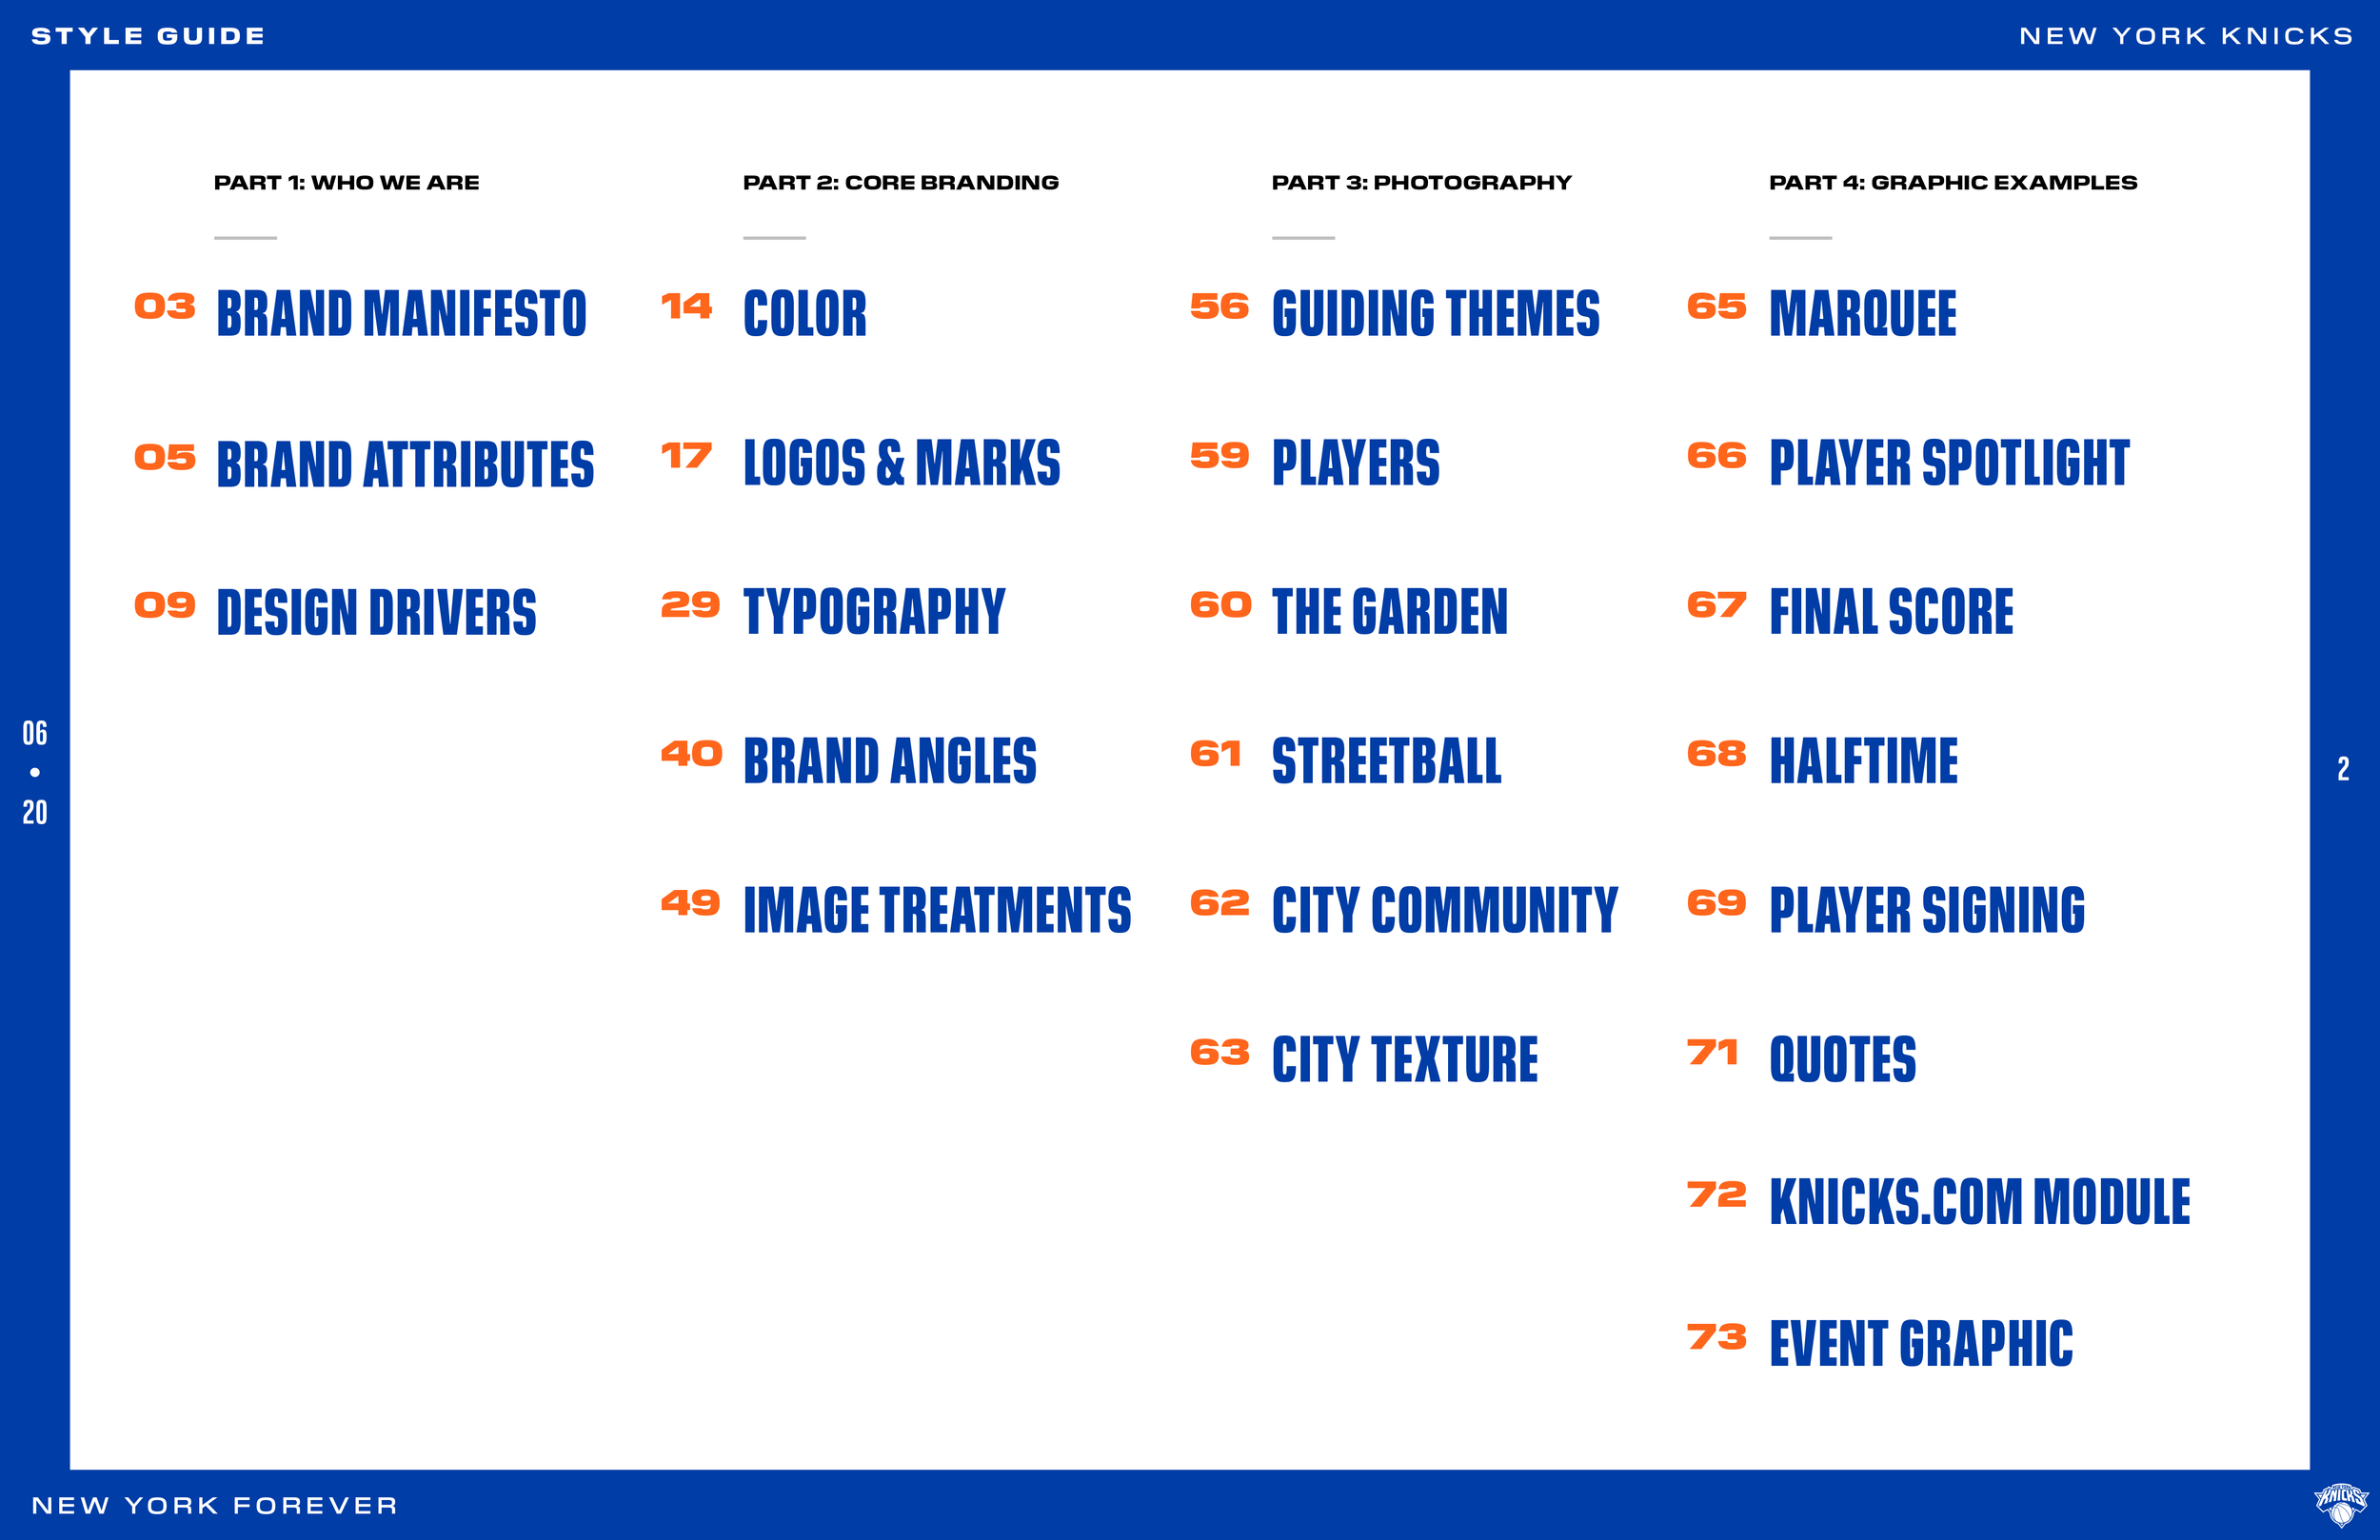 Pages from KNICKS_StyleGuide_062420 2.png